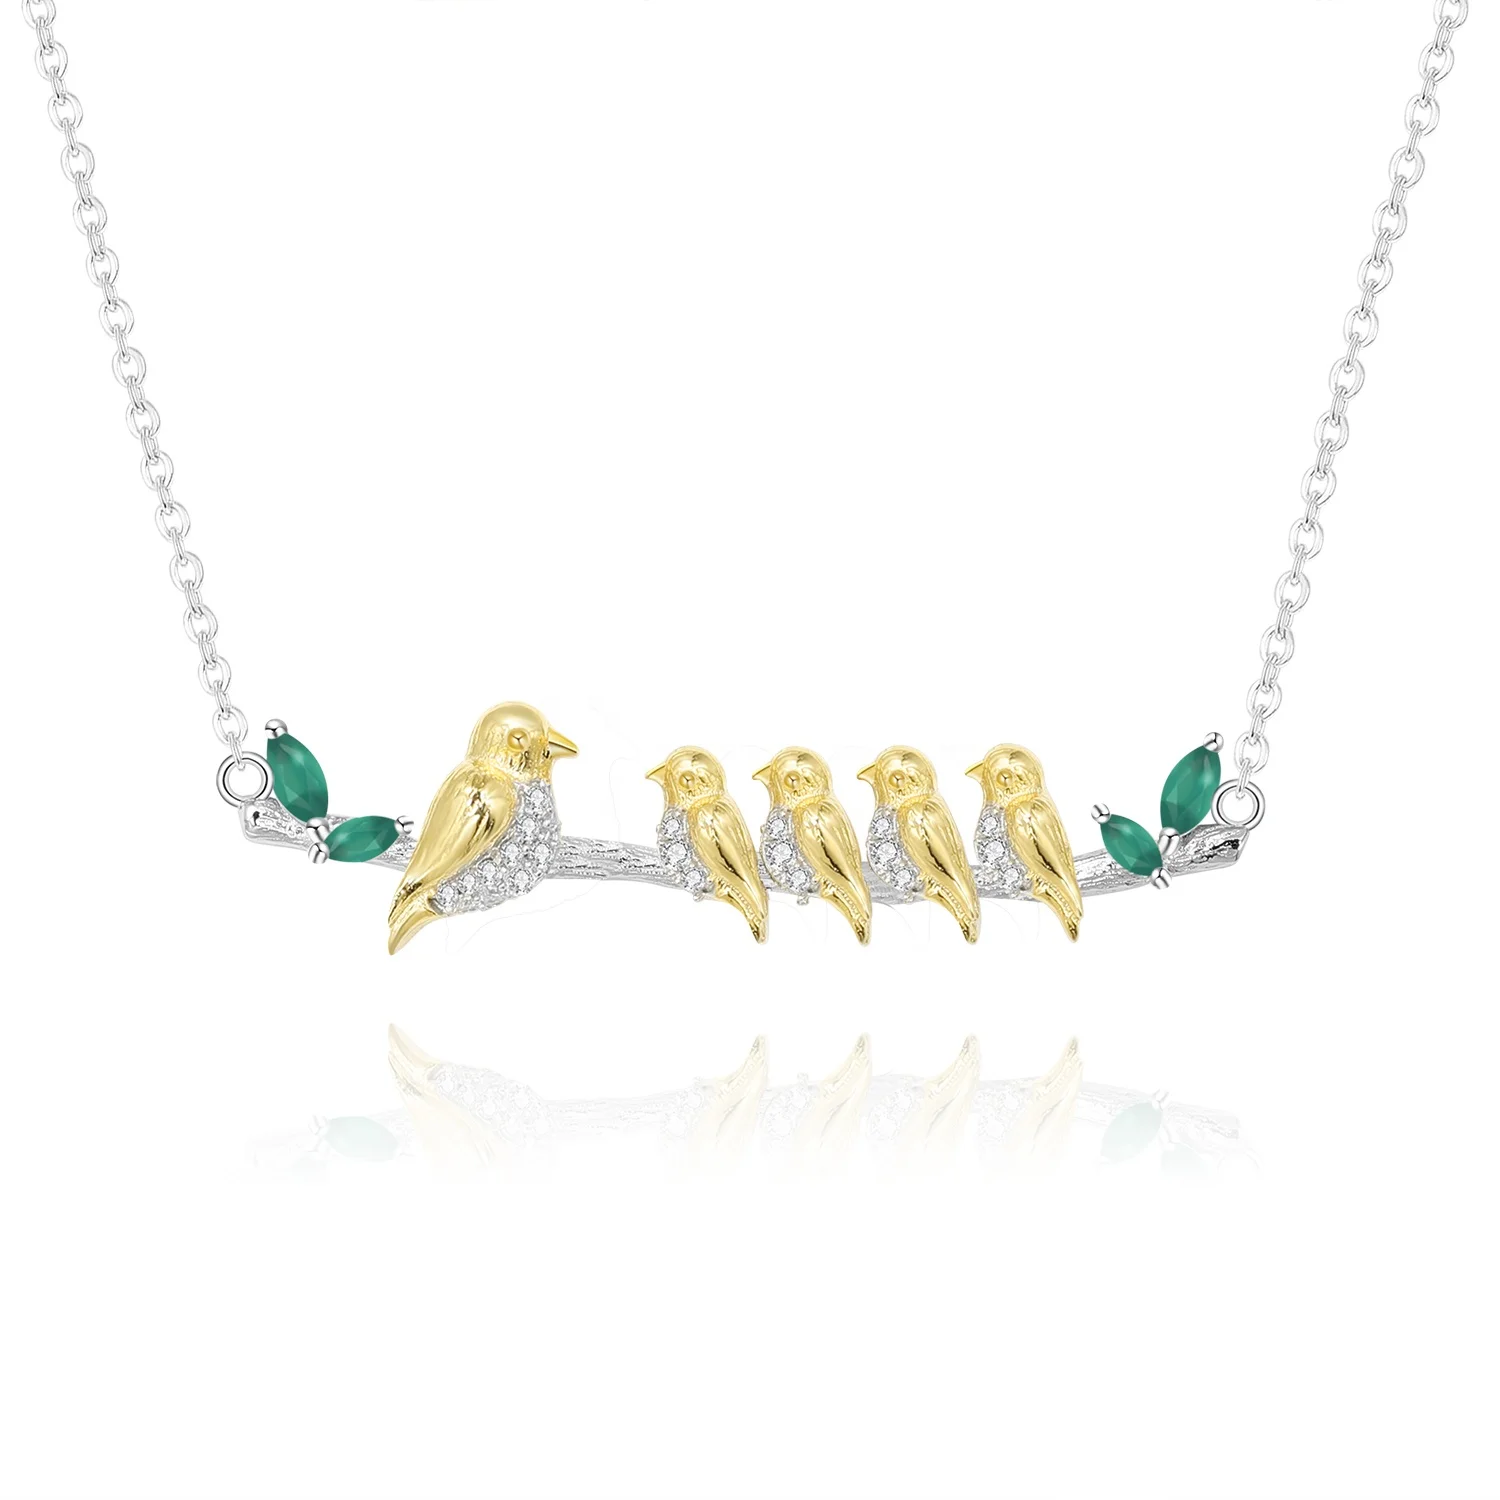 

Abiding Four Gold Plated Bird Animal Pendant Natural Green Agate 925 Sterling Silver Necklace Jewelry For Women